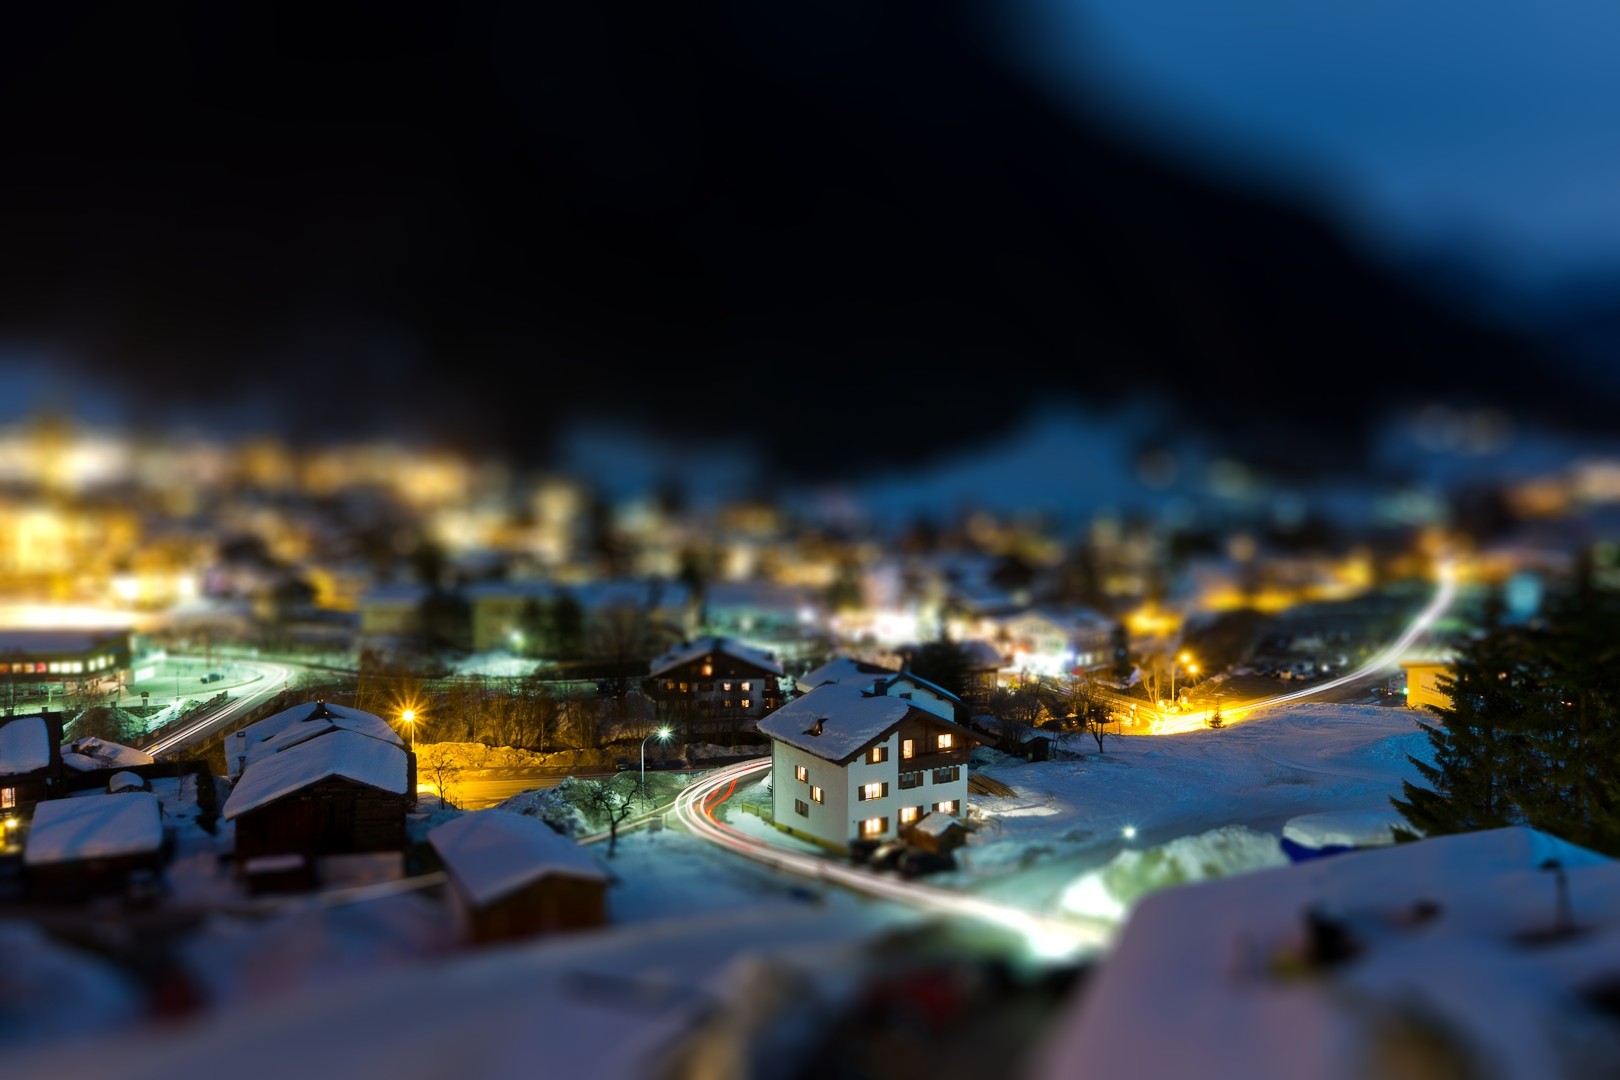 General 1620x1080 house town trees nature winter snow night lights road street mountains rooftops light trails tilt shift